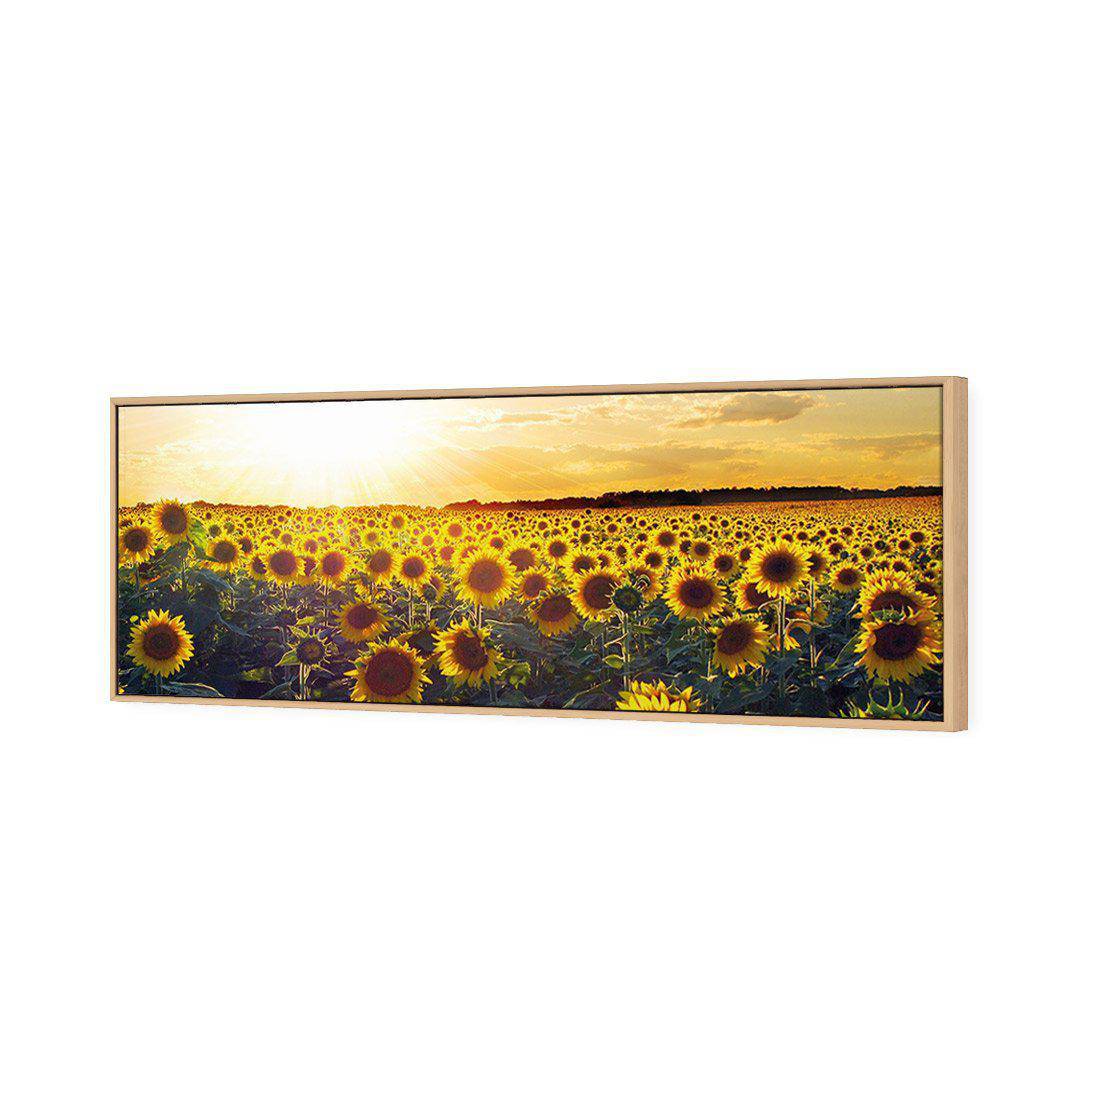 Sunflowers At Sunset Canvas Art-Canvas-Wall Art Designs-60x20cm-Canvas - Oak Frame-Wall Art Designs